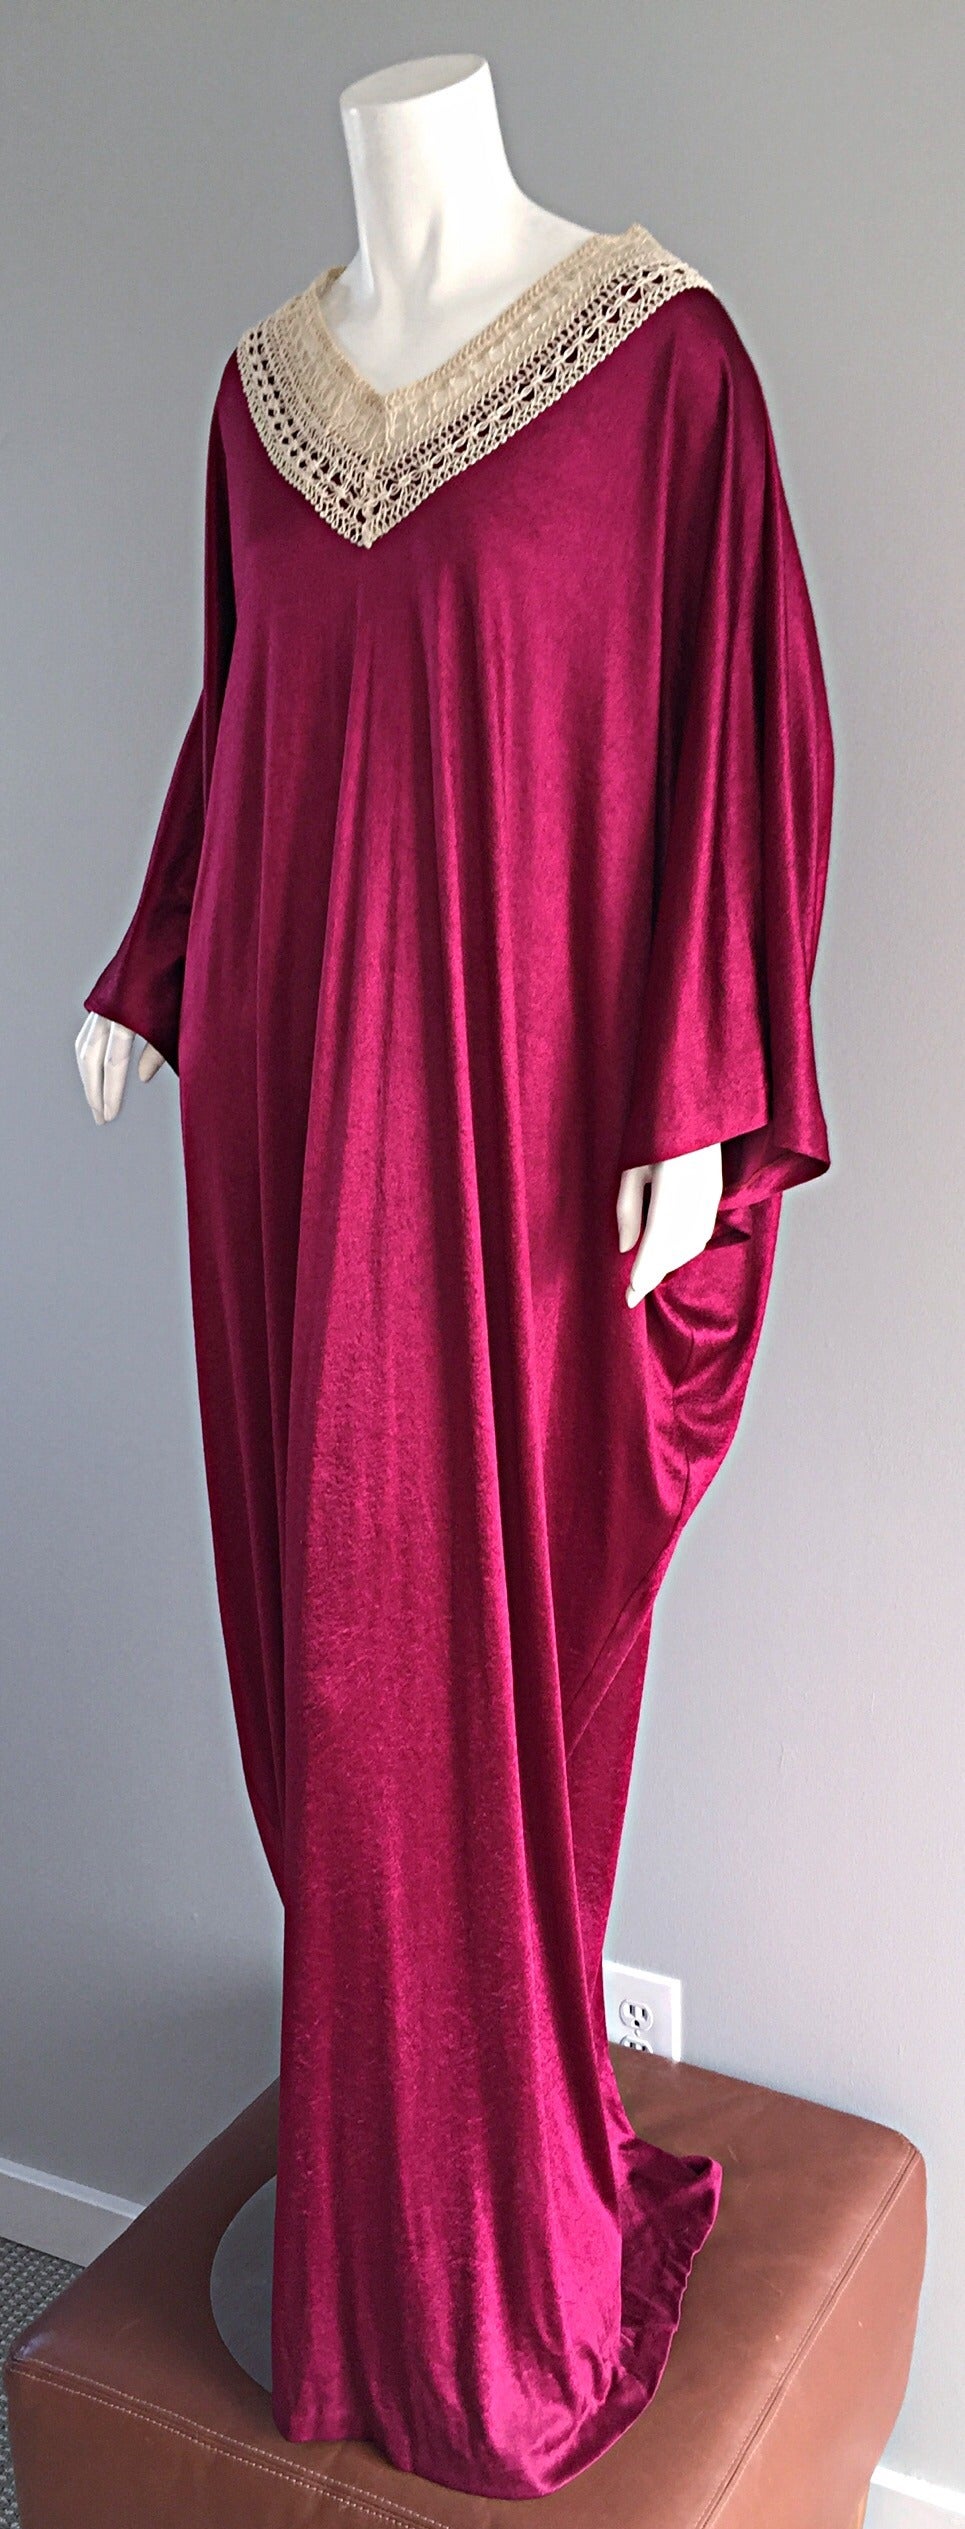 Absolutely beautiful vintage Mary McFadden caftan / kaftan! Rich wine/burgundy color, with ivory hand-crochet collar. Slinky Grecian fit. Looks incredible on! Perfect as an evening ensemble, or over a swimsuit. In great condition. Made in United